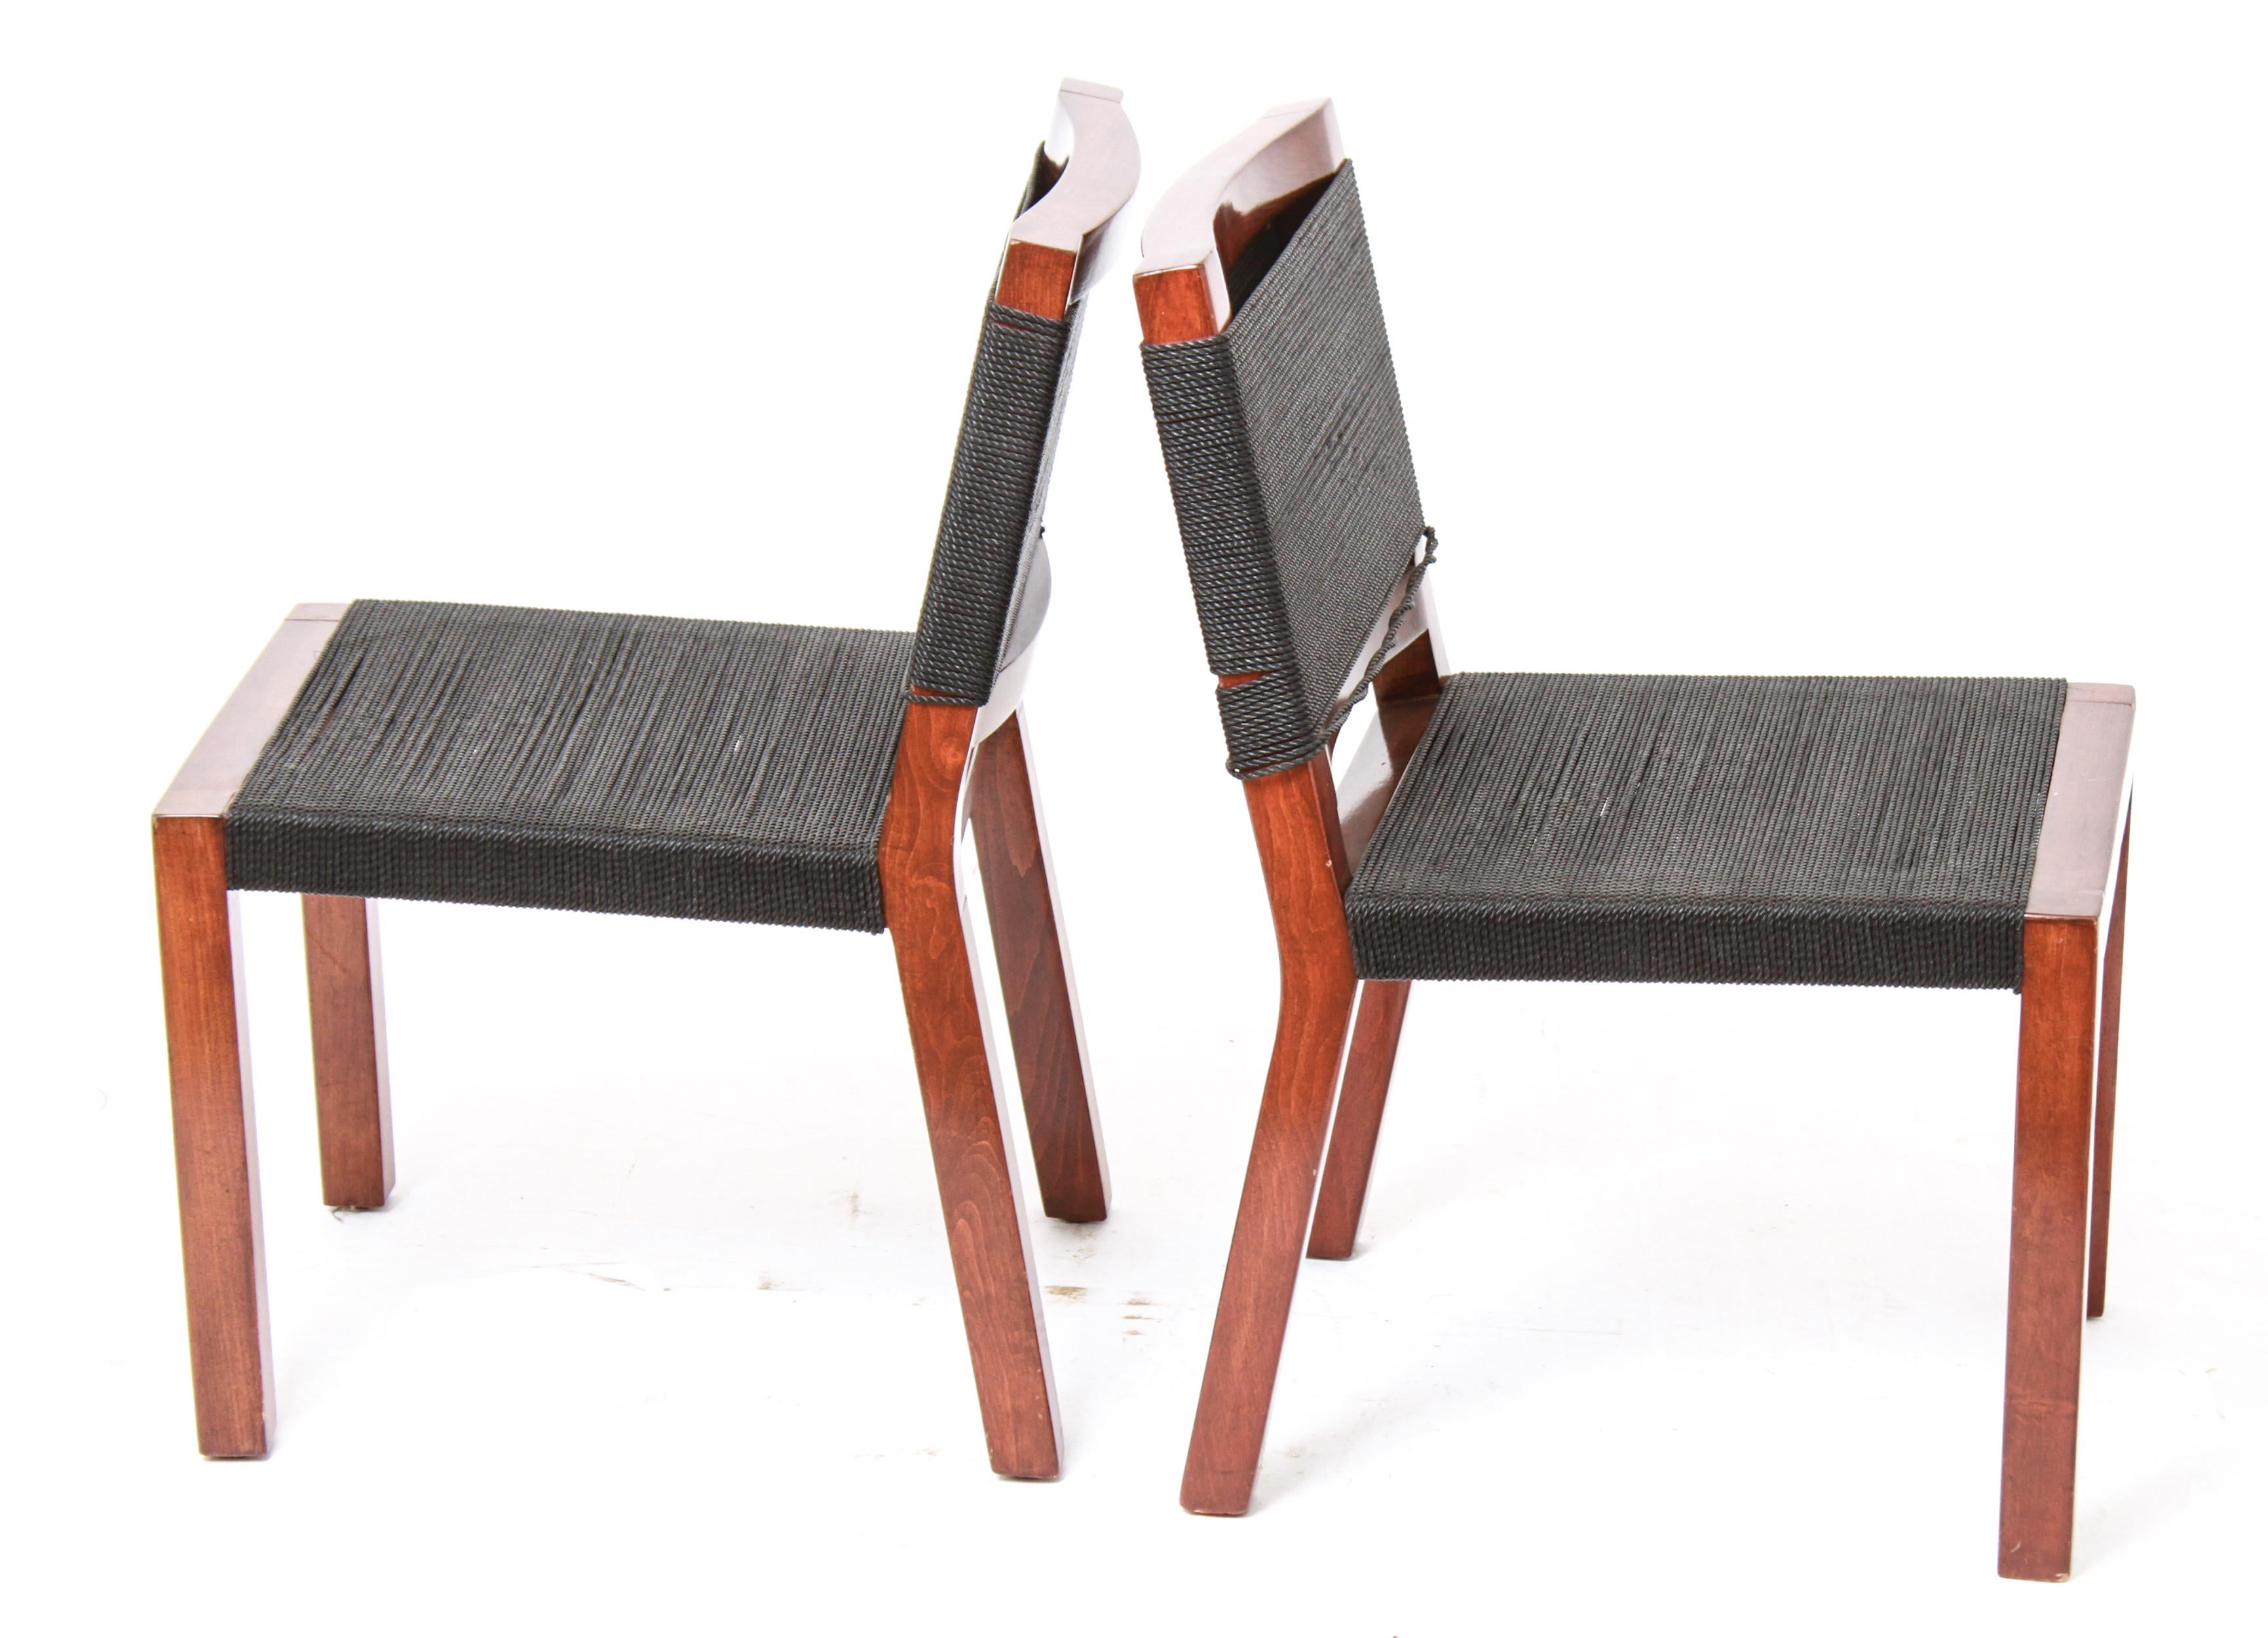 Modern pair of Hendrik van Keppel & Taylor Greene for Van Keppel-Greene side chairs with wood frames and black vinyl cord seats and backs. The pair is in great vintage condition with age-appropriate wear. From the Collection of Actor Ron Rifkin.